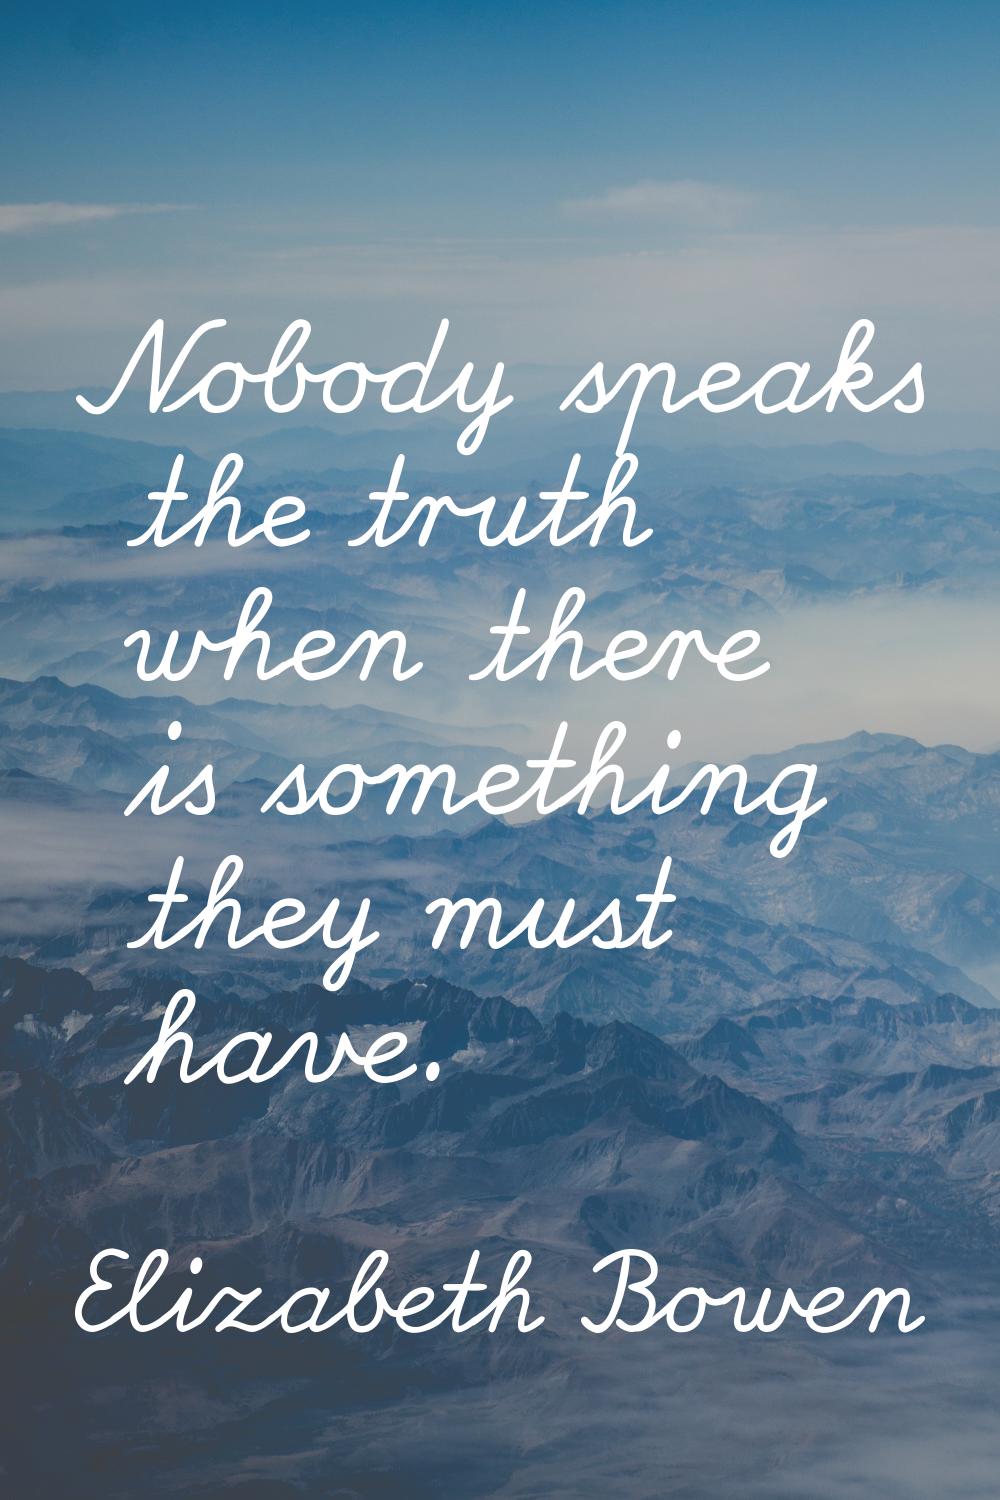 Nobody speaks the truth when there is something they must have.